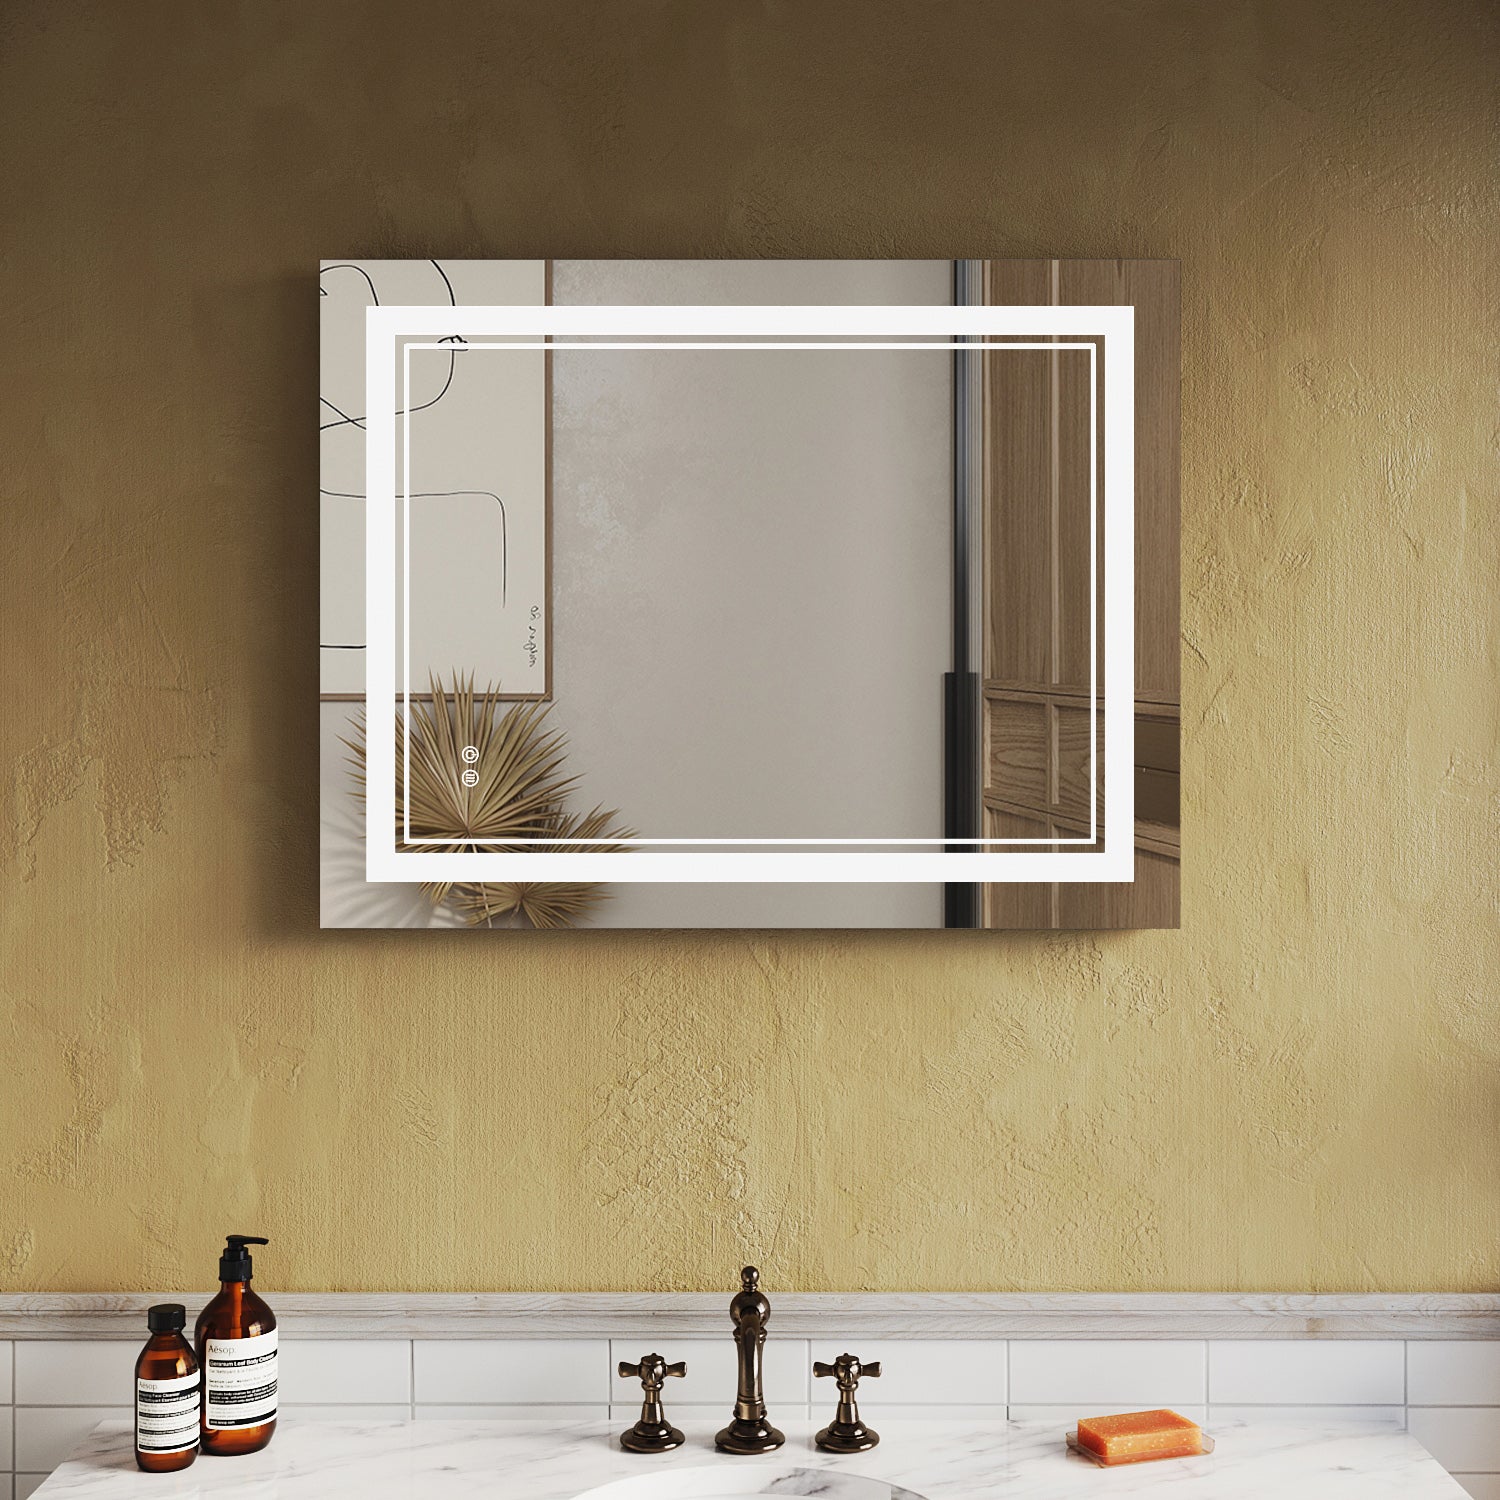 SUNNY SHOWER LED Bathroom MakeUp Mirror 28 x 36 in.丨Anti-Fog and Waterproof丨3 Color Temperature Setting丨Memory Function - SUNNY SHOWER